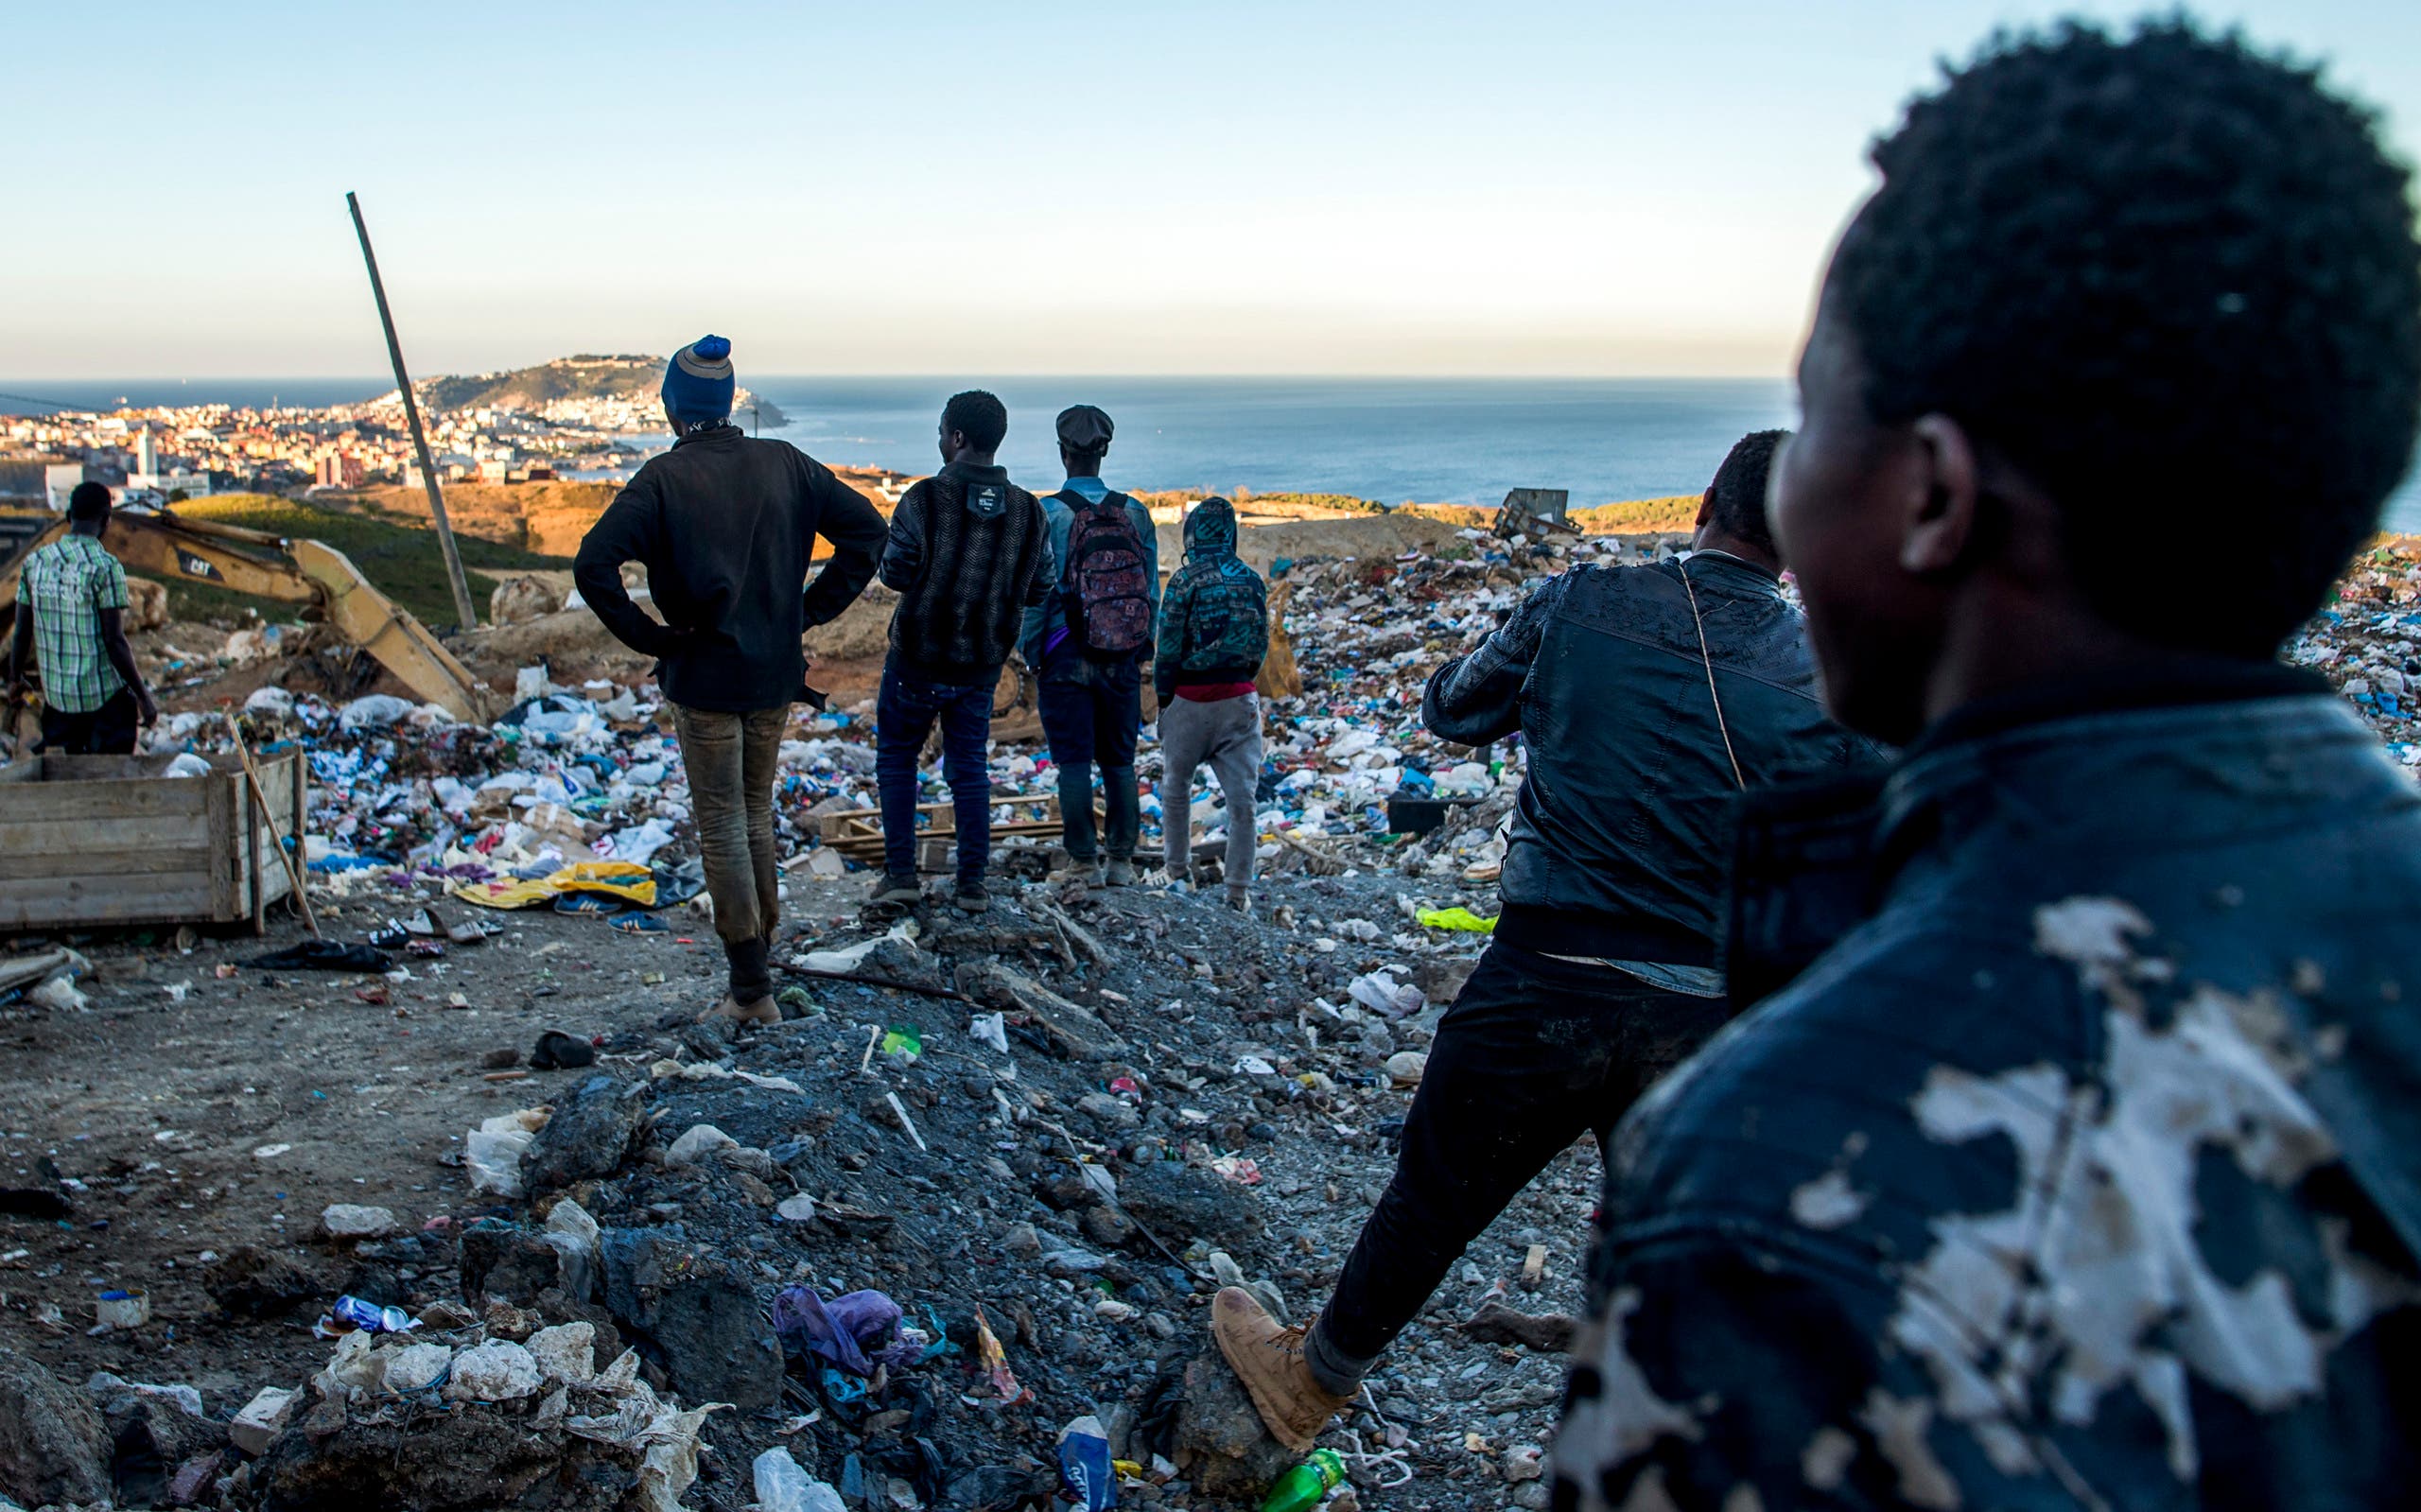 migrants looks for food in morroco garbage (AFP)